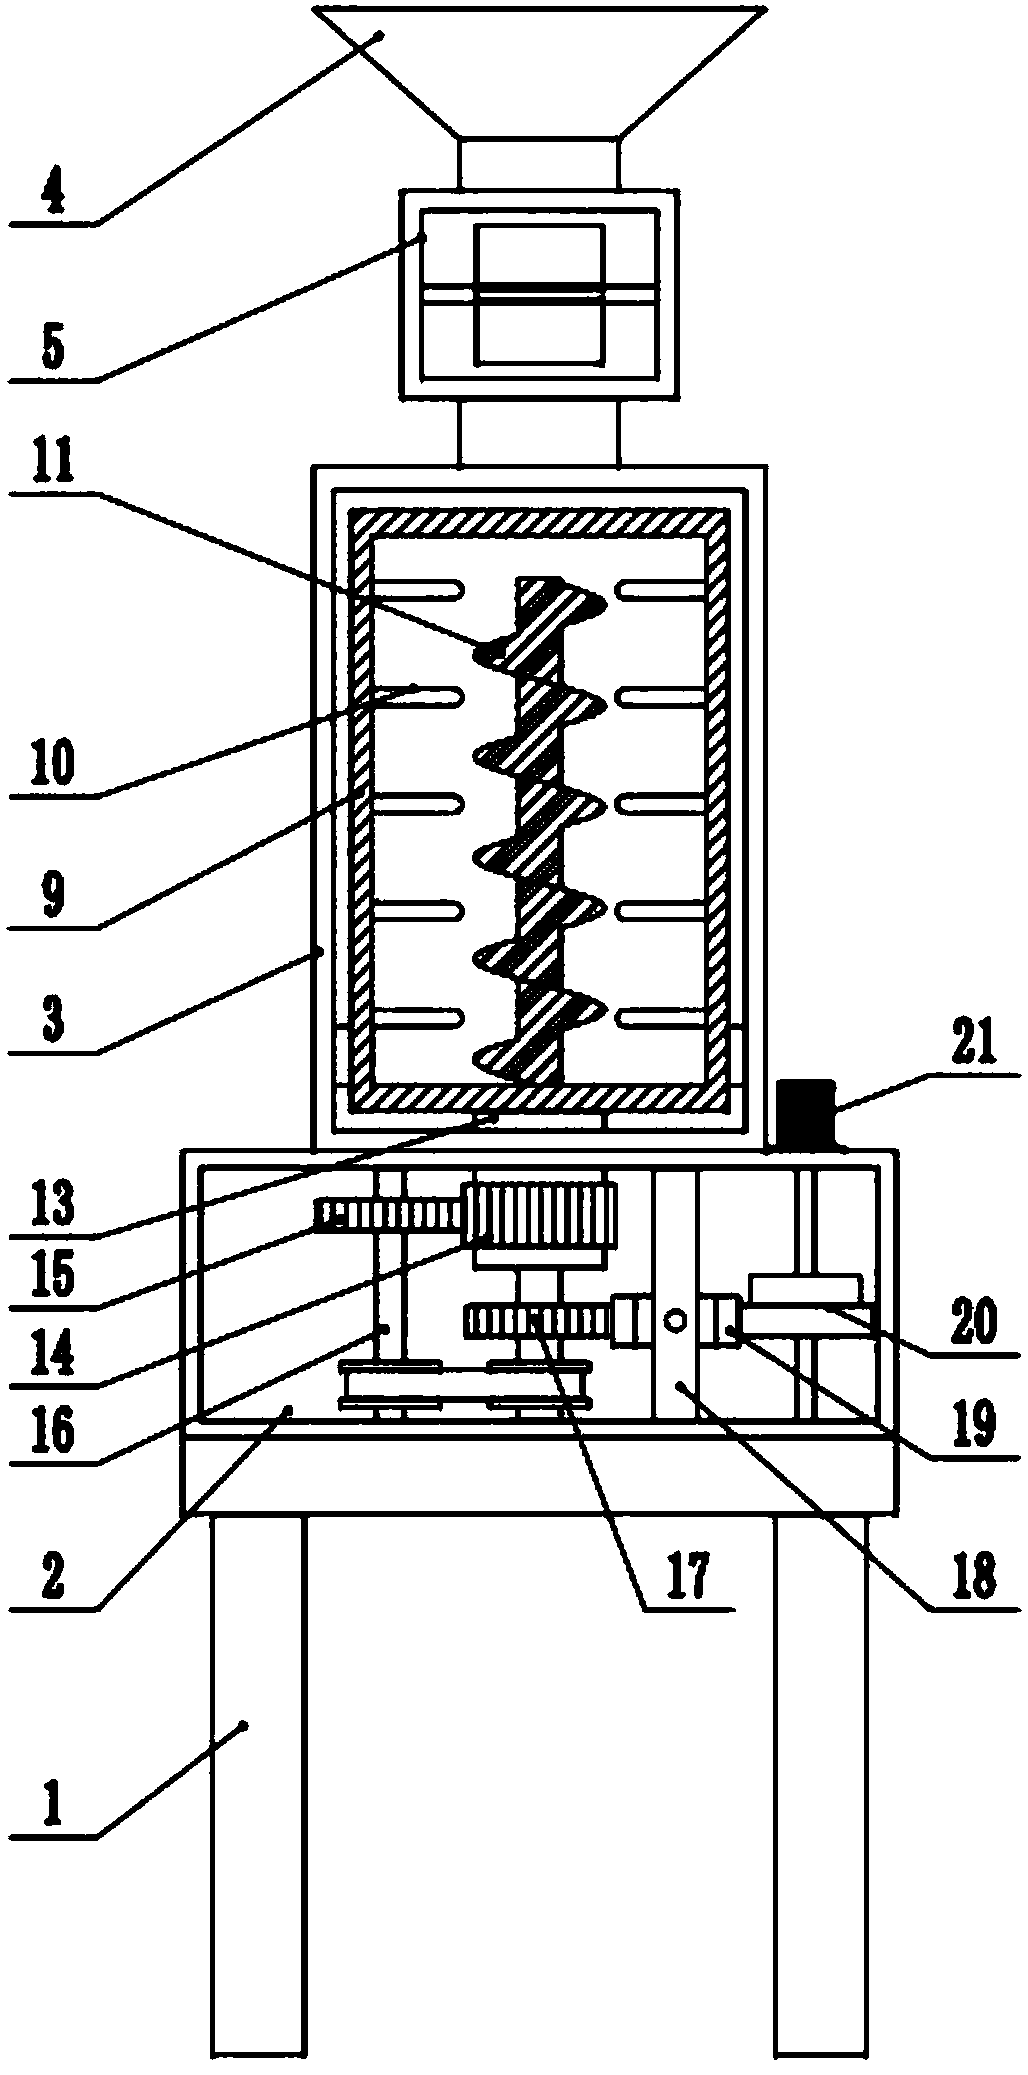 Fodder stirring device based on gear assembly driver